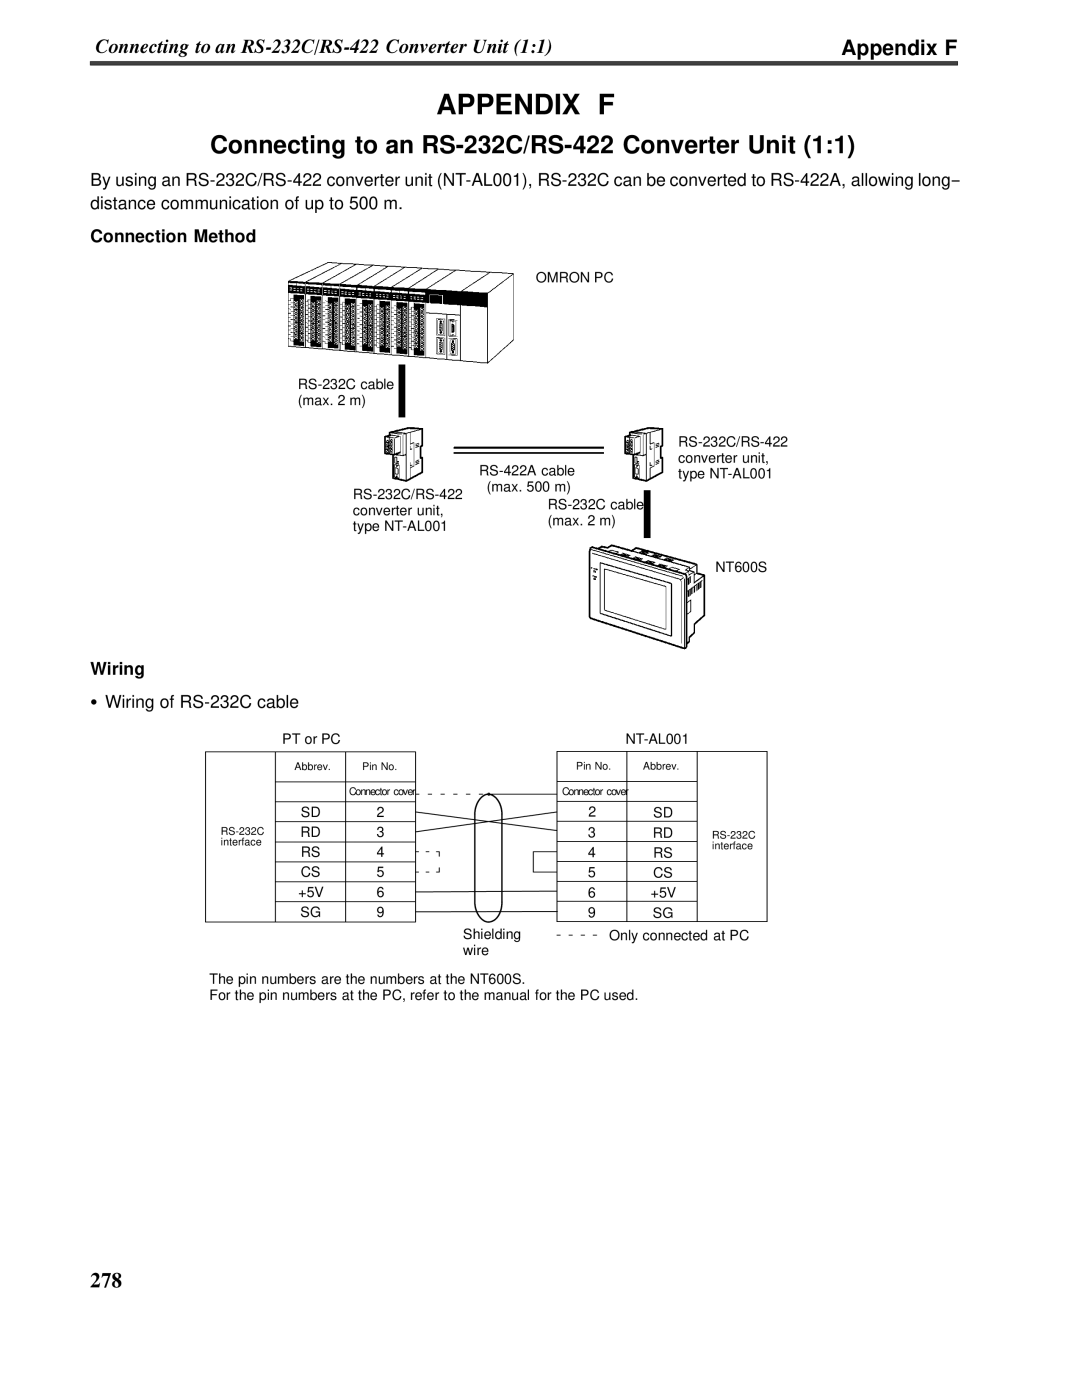 Omron V022-E3-1 Appendix F, #0!891*+, Connecting to an RS-232C/RS-422Converter Unit 1:1, Connection Method, Wiring 